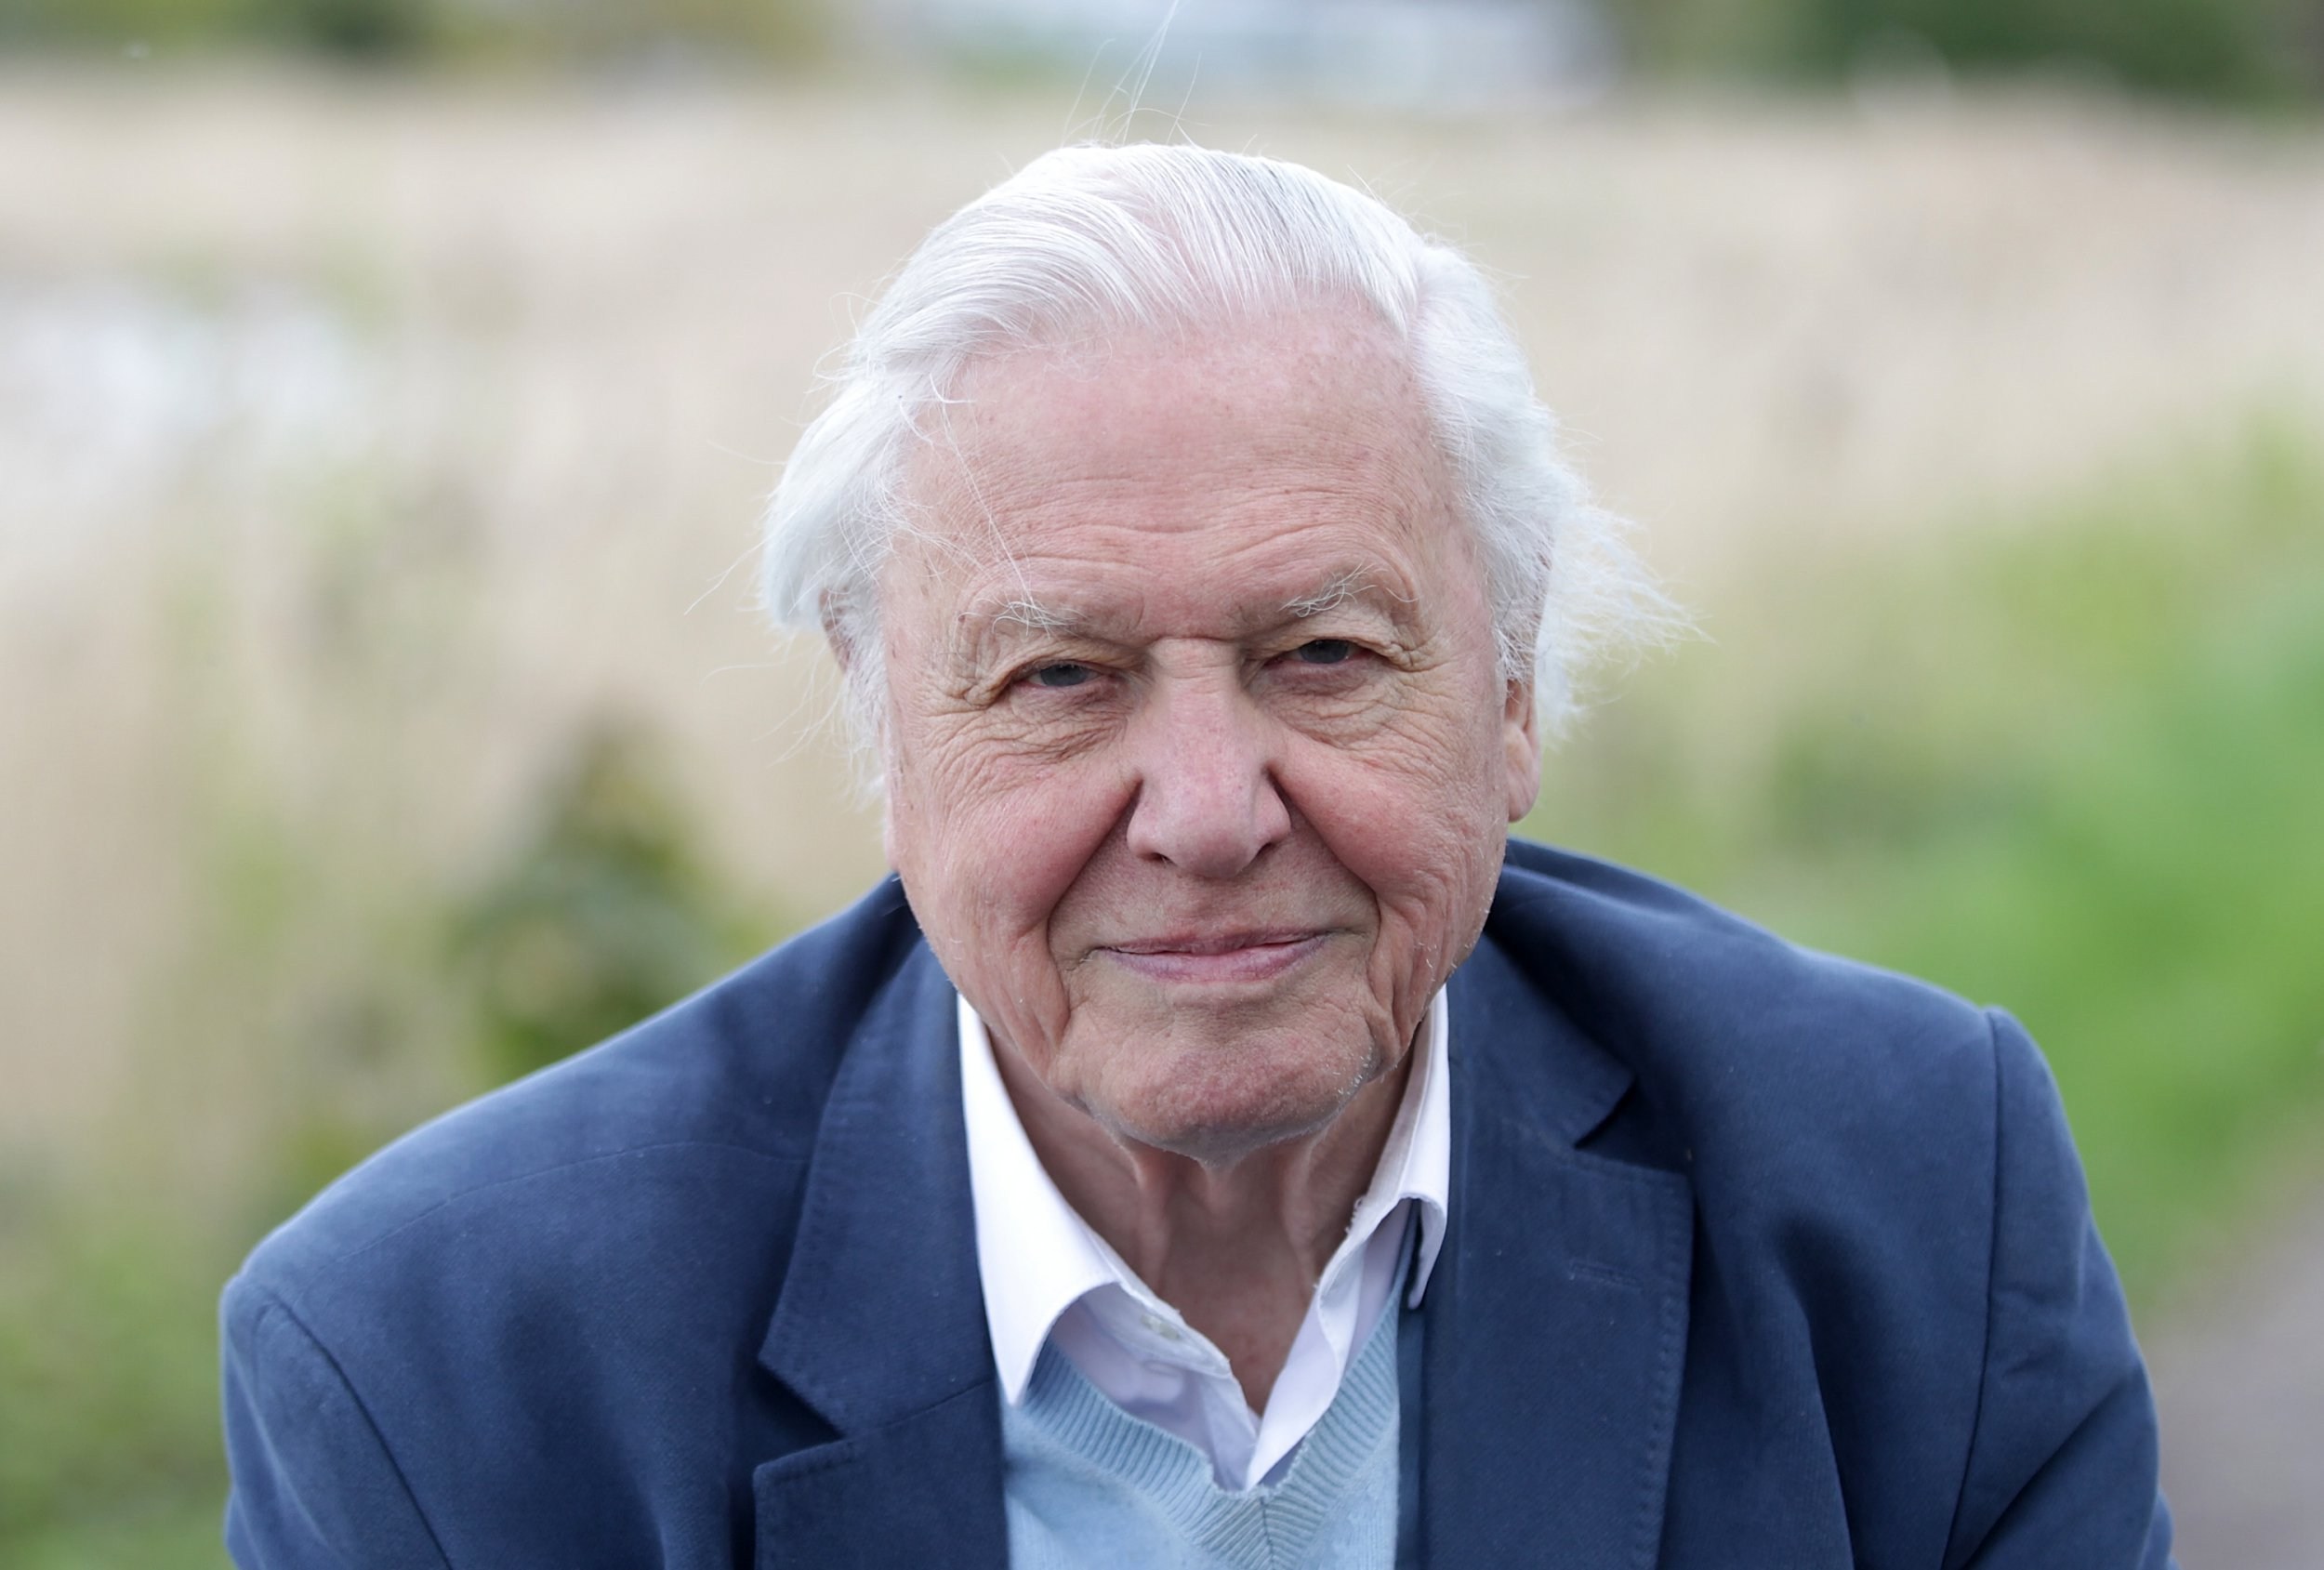 Sir David Attenborough thinks his generation ‘muffed’ chance to save natural world: ‘The world belongs to young people’